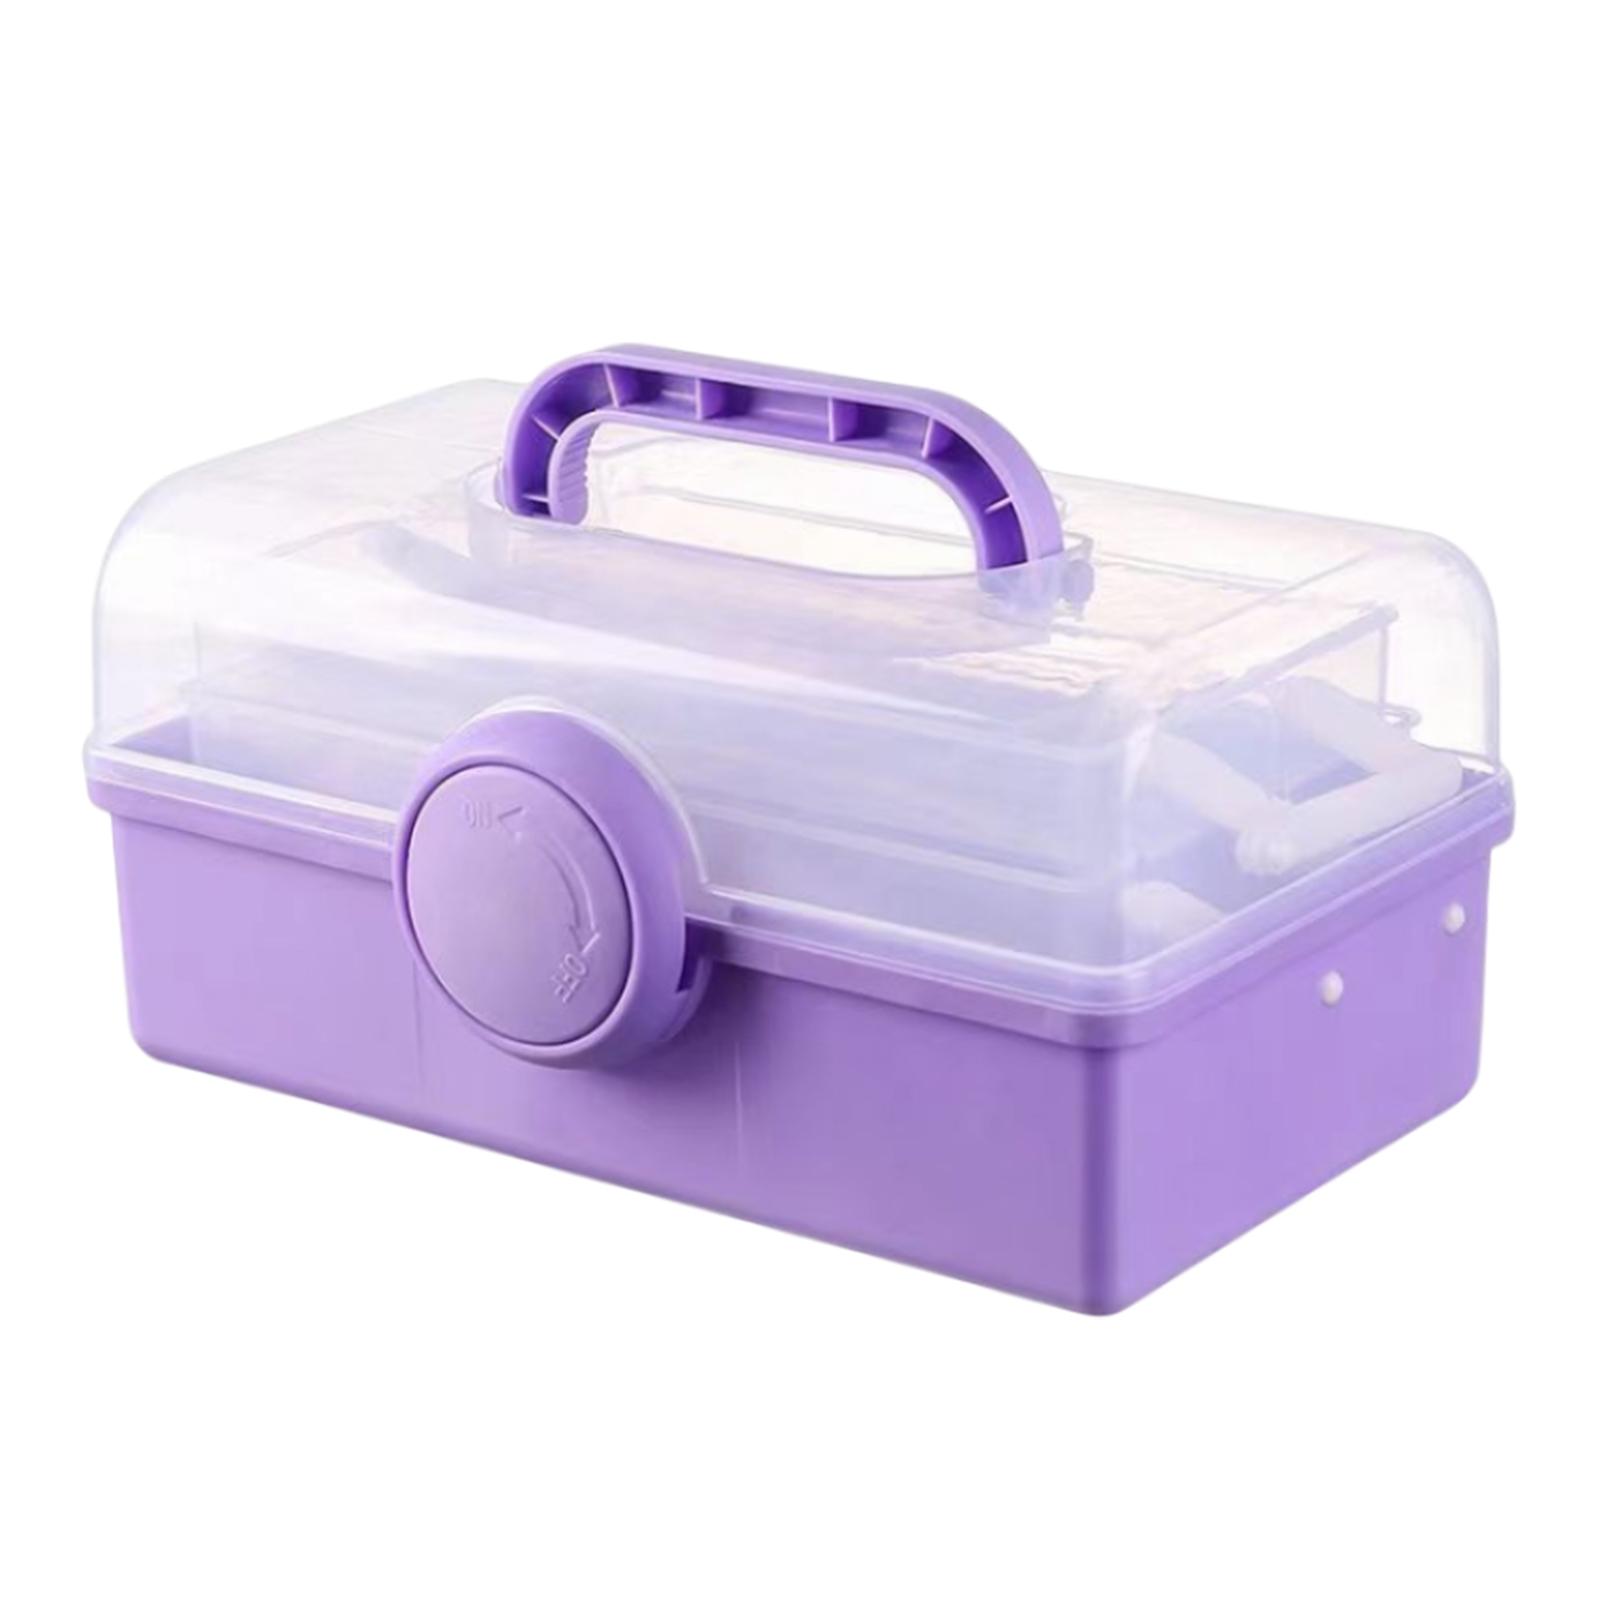 Portable Storage Box for Children Toys Small Household Items Sewing Supplies Violet, Size: 26.5cmx15.5cmx13cm, Purple